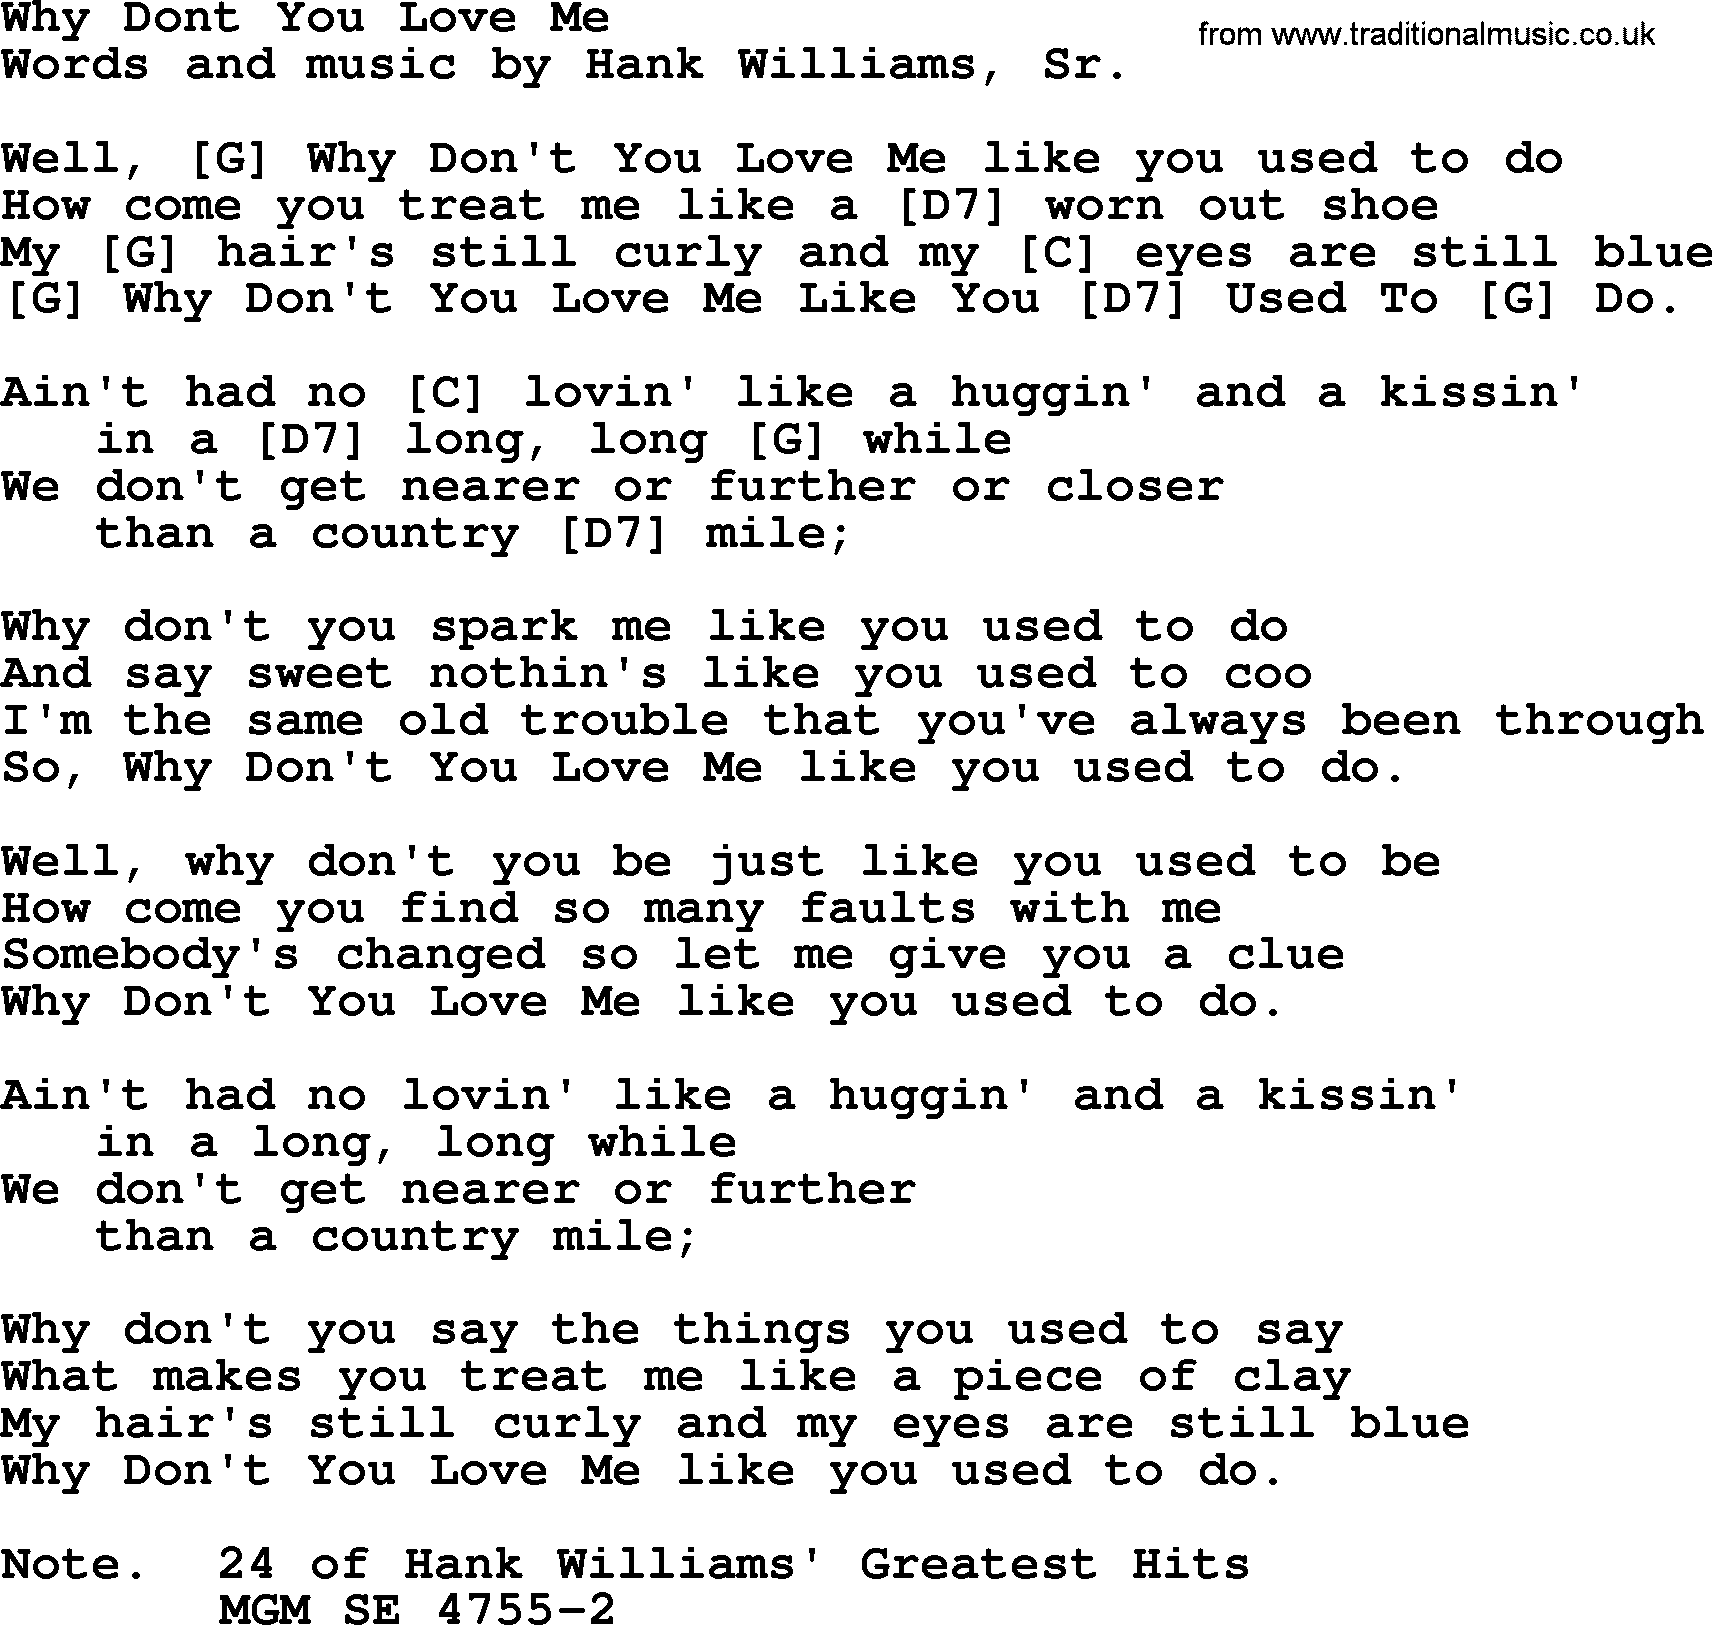 Hank Williams song Why Dont You Love Me, lyrics and chords